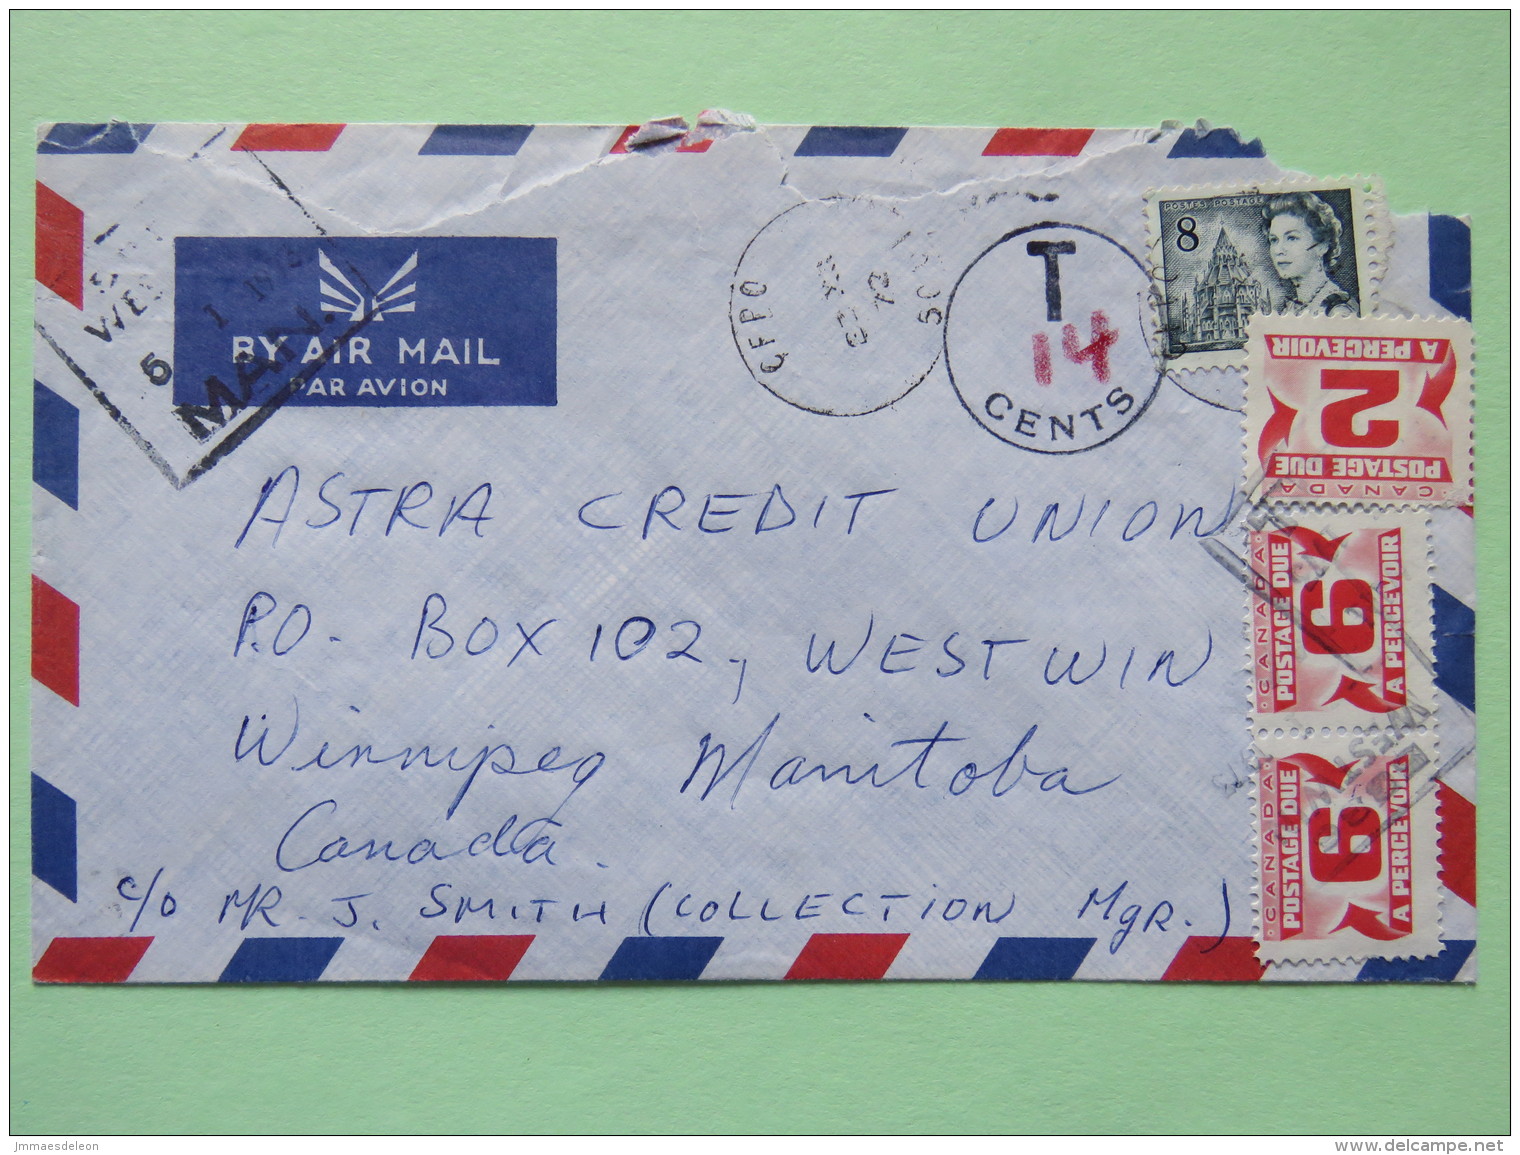 Canada 1972 Military Cover (Cyprus Conflict) From Cyprus (CFPO 5001) To Canada - Due Tax Stamps - Queen - Church - Covers & Documents